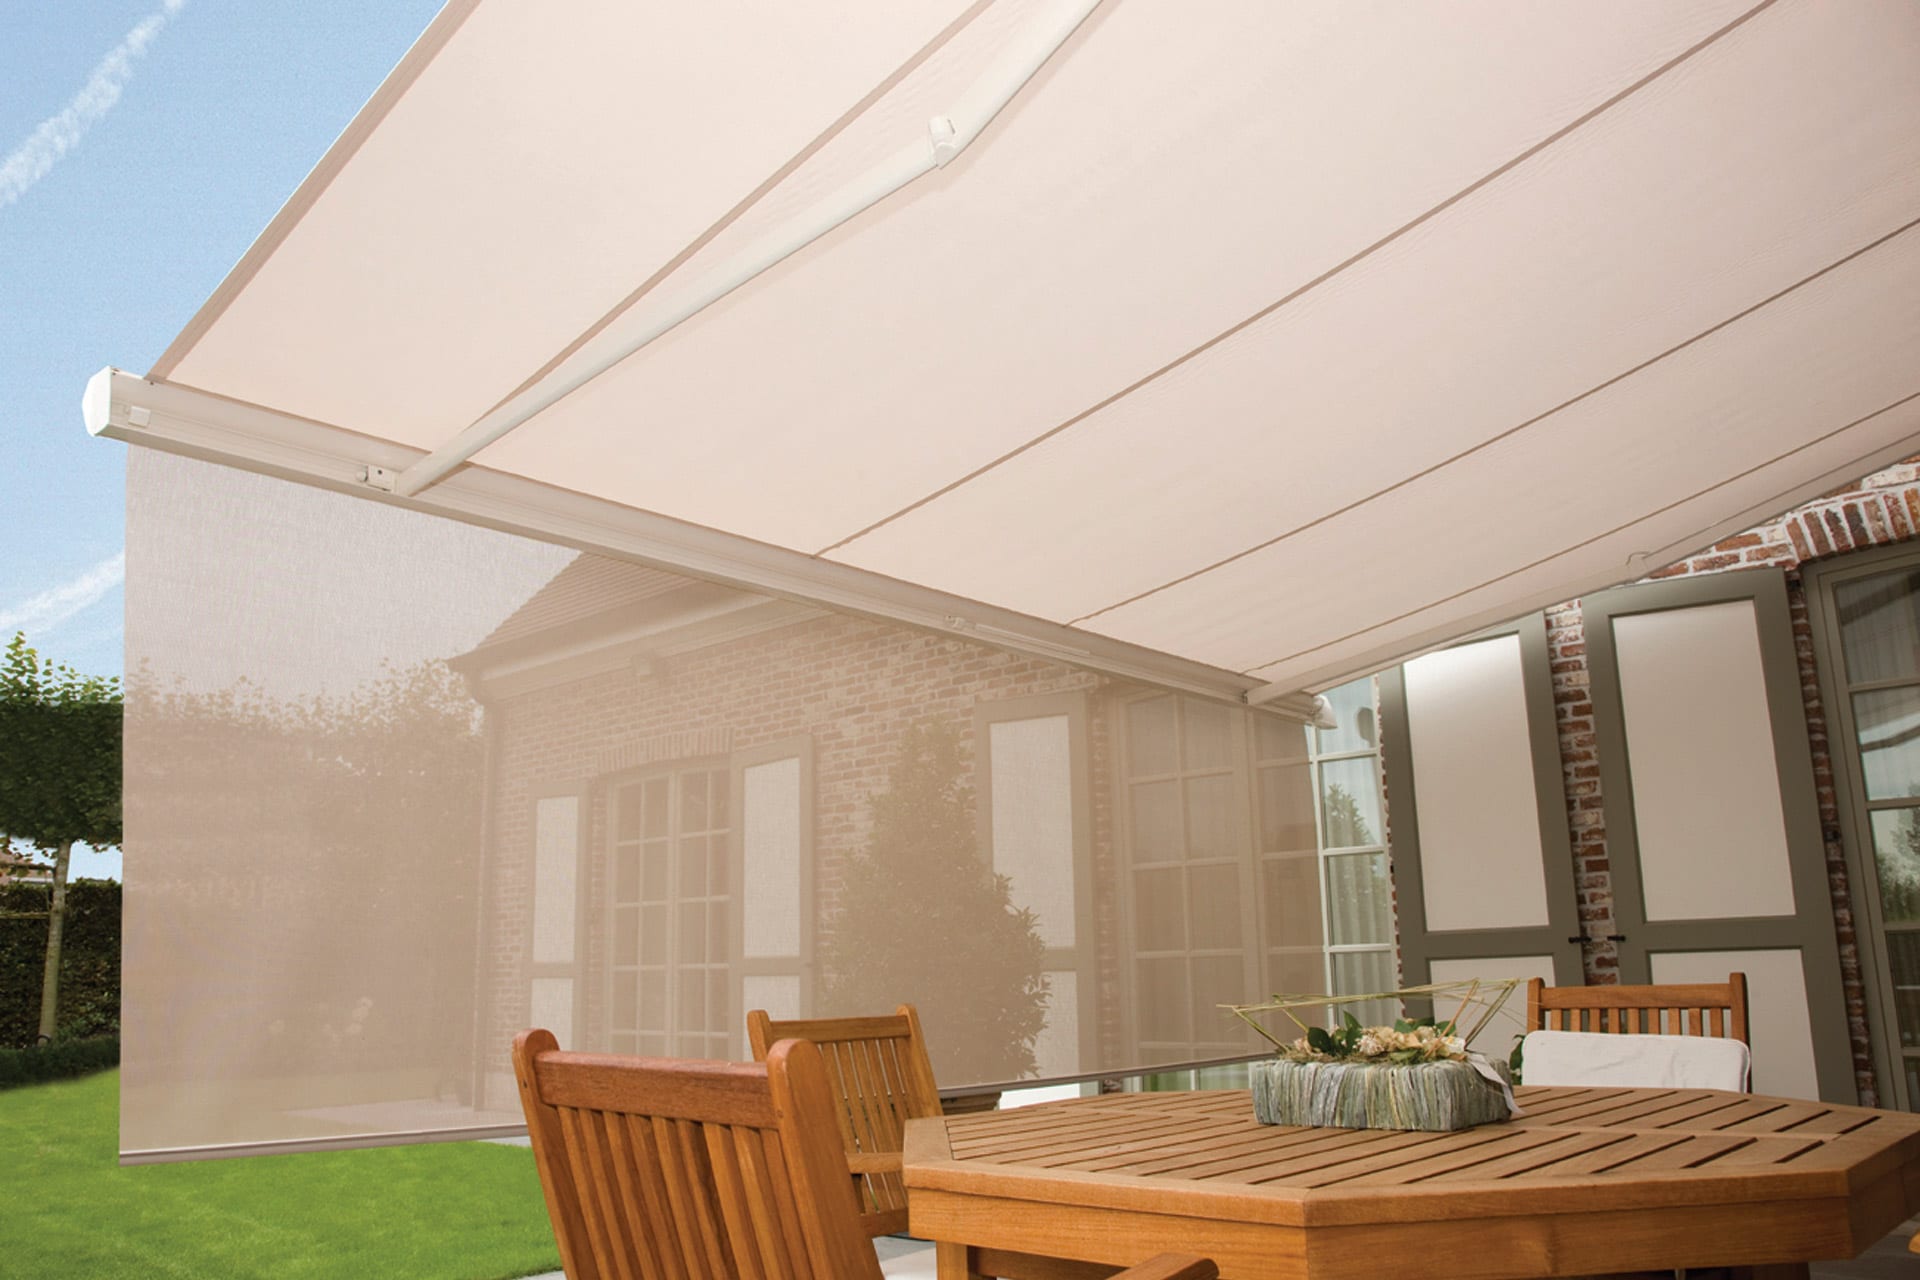 Retractable Awnings in Greater Danbury, CT | Patio and Deck Awnings ...